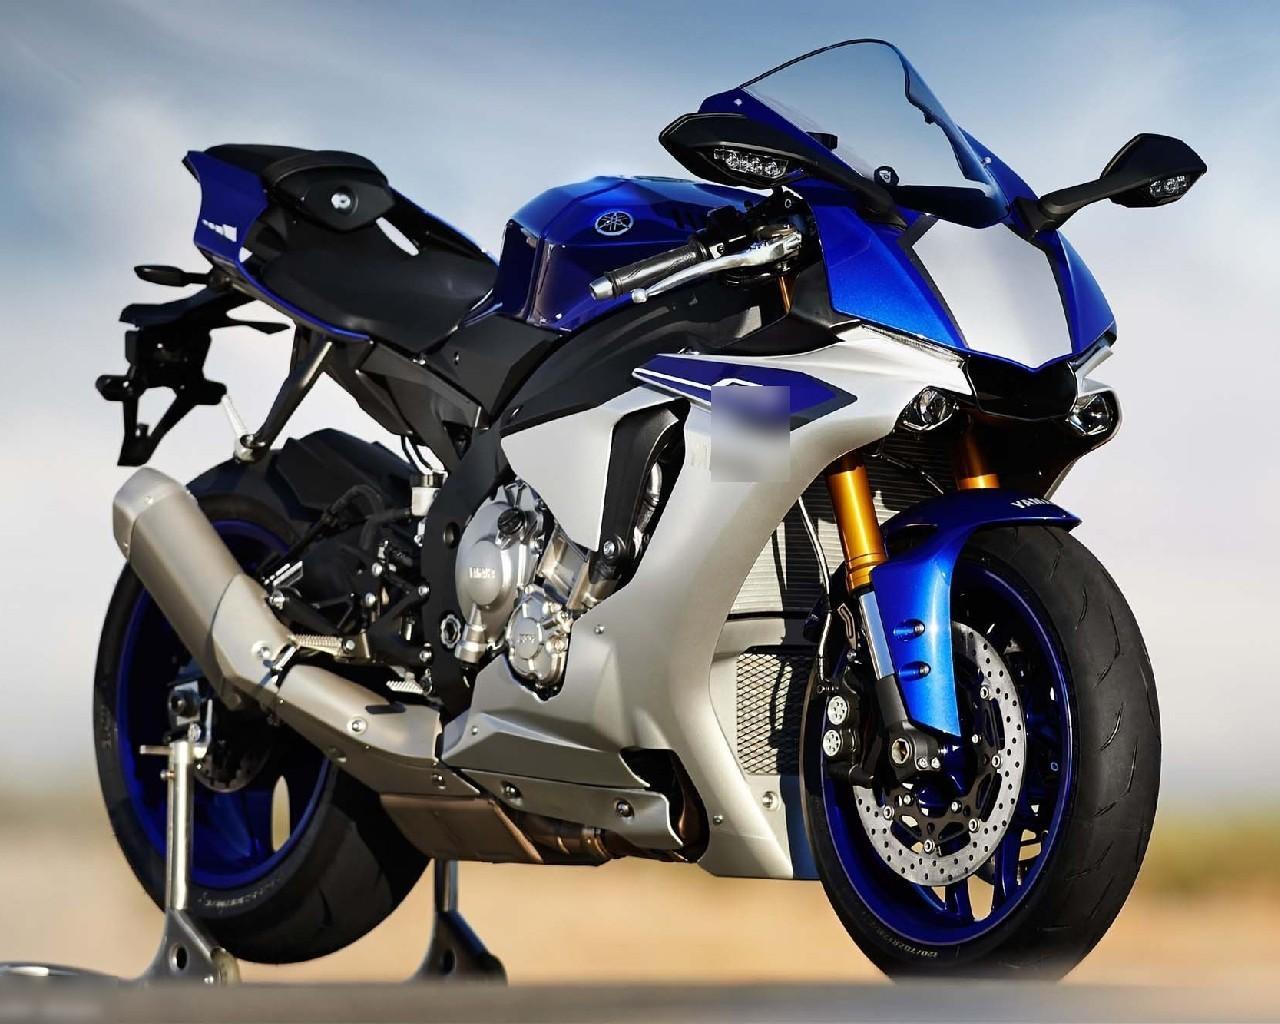 New Wallpapers Yamaha Yzf R1 18 For Android Apk Download